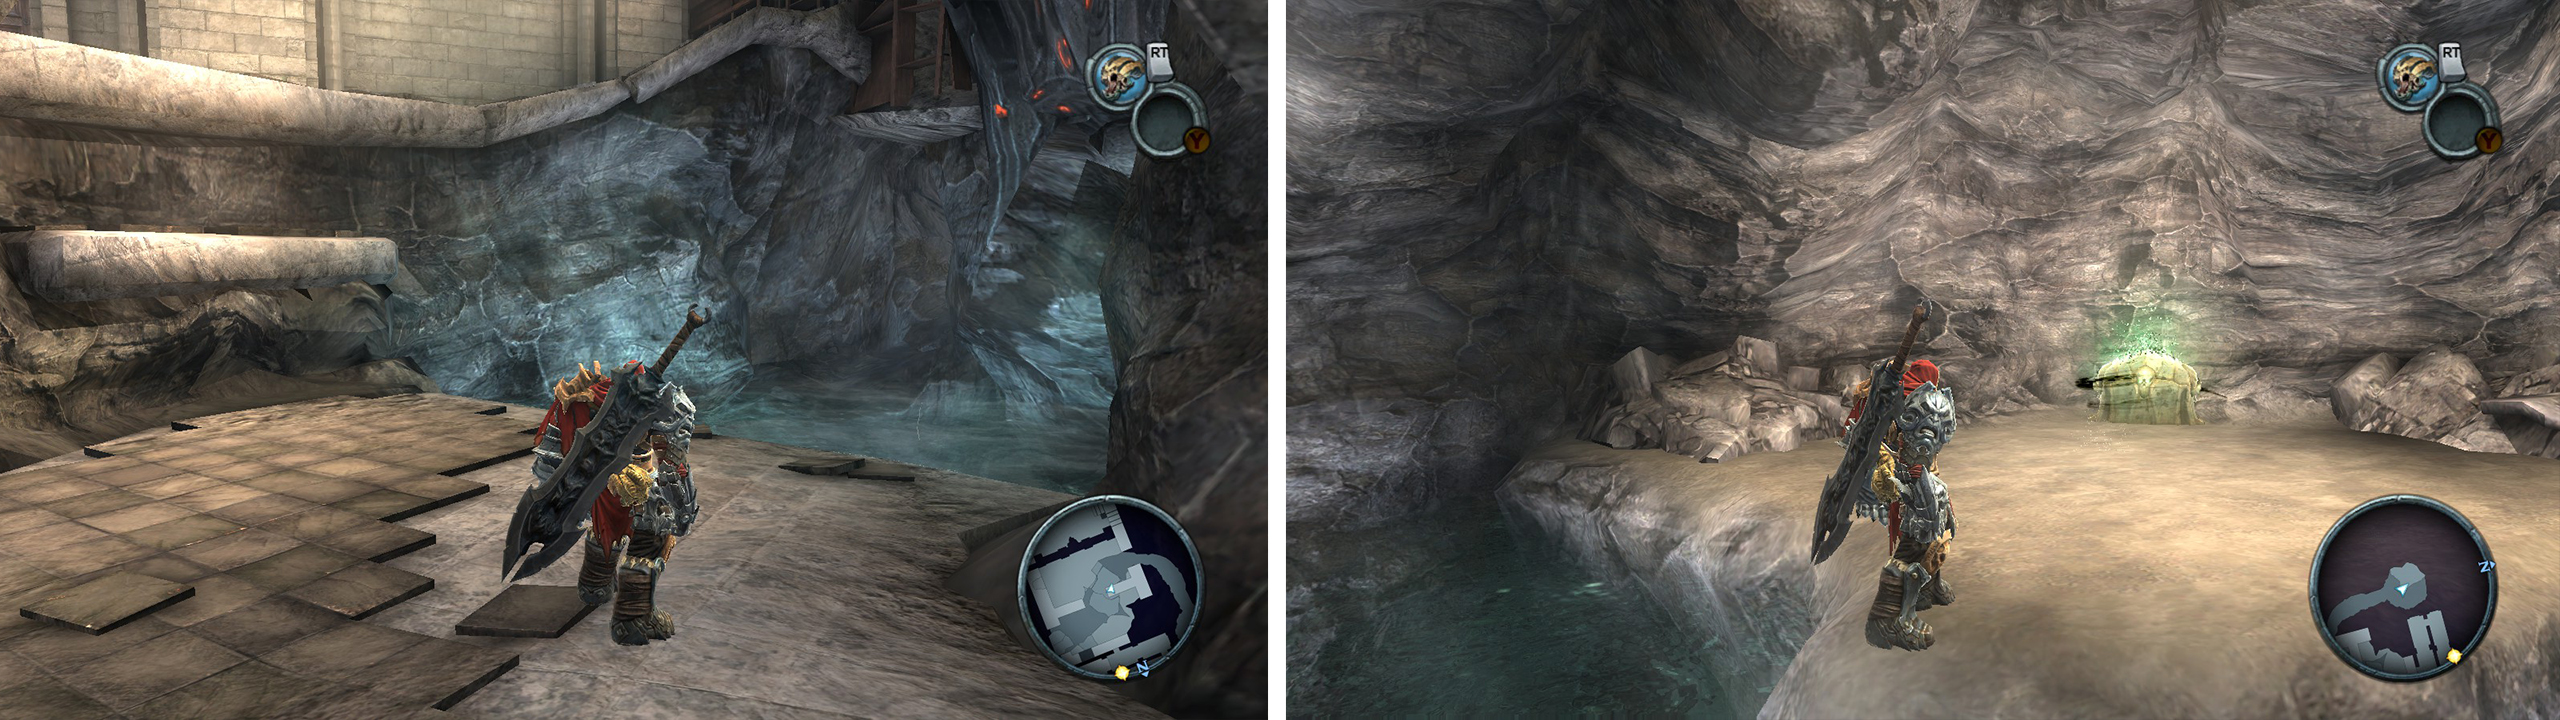 Swim through the pool of water (left) to find a Life Stone Shard (right).